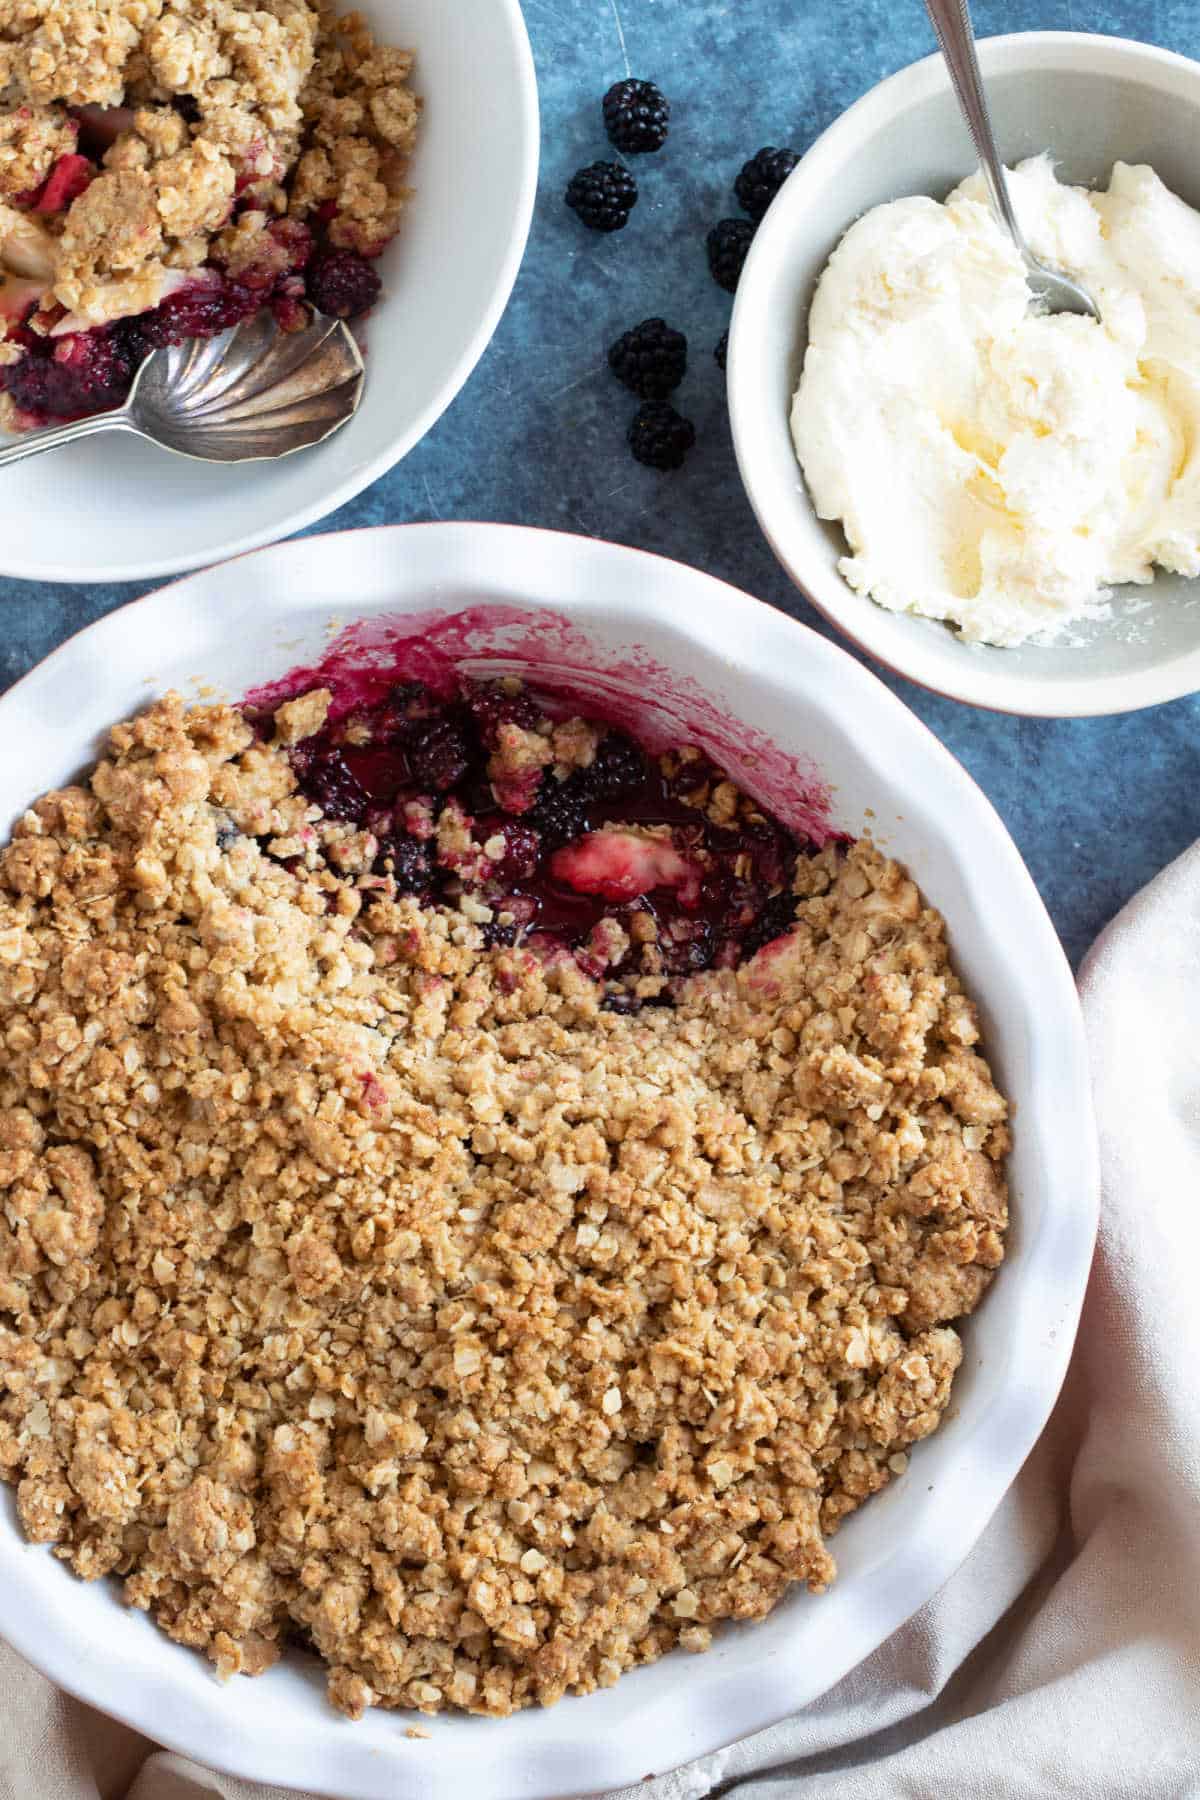 Blackberry crumble in a large baking dish with a bowl of whipped cream on the side.